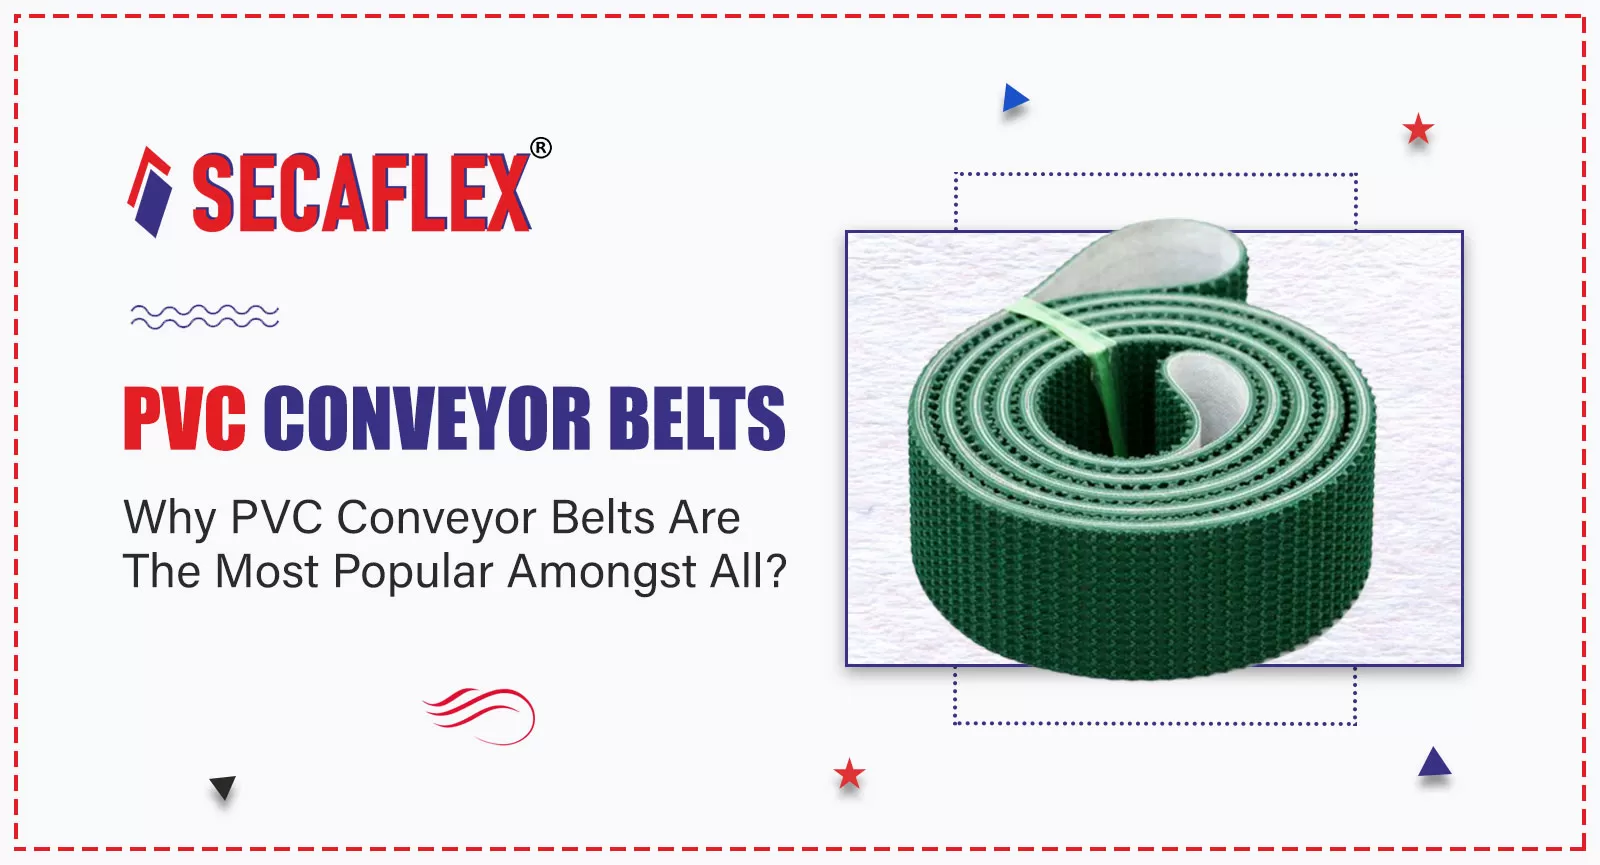 Why PVC Conveyor Belts Are The Most Popular Amongst All?